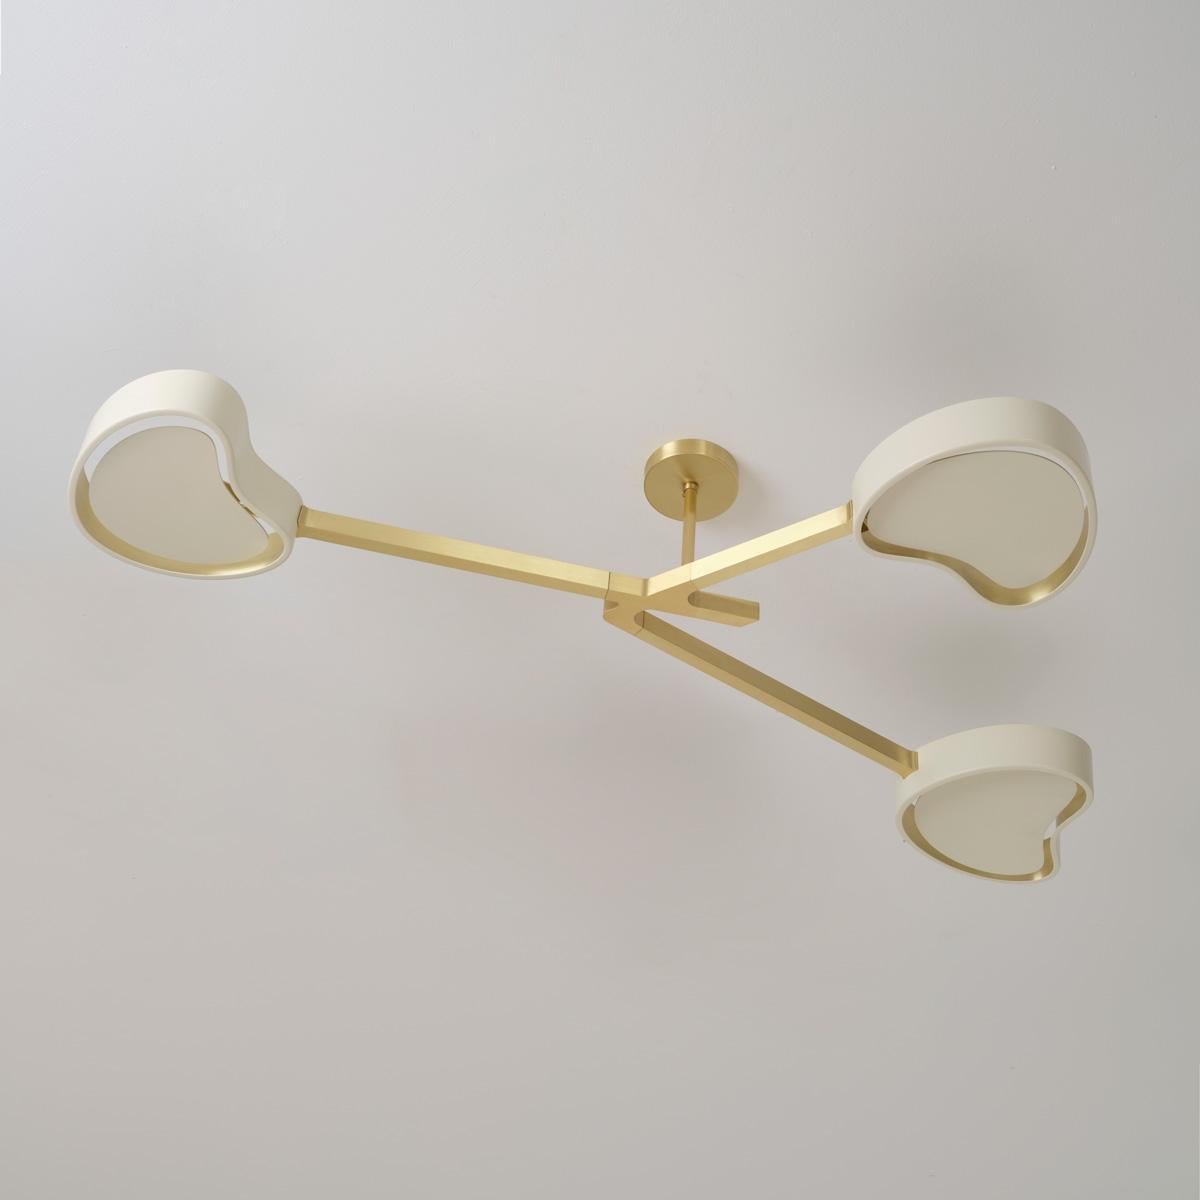 Cuore N.3 Ceiling Light by Gaspare Asaro. Bronze Finish For Sale 3